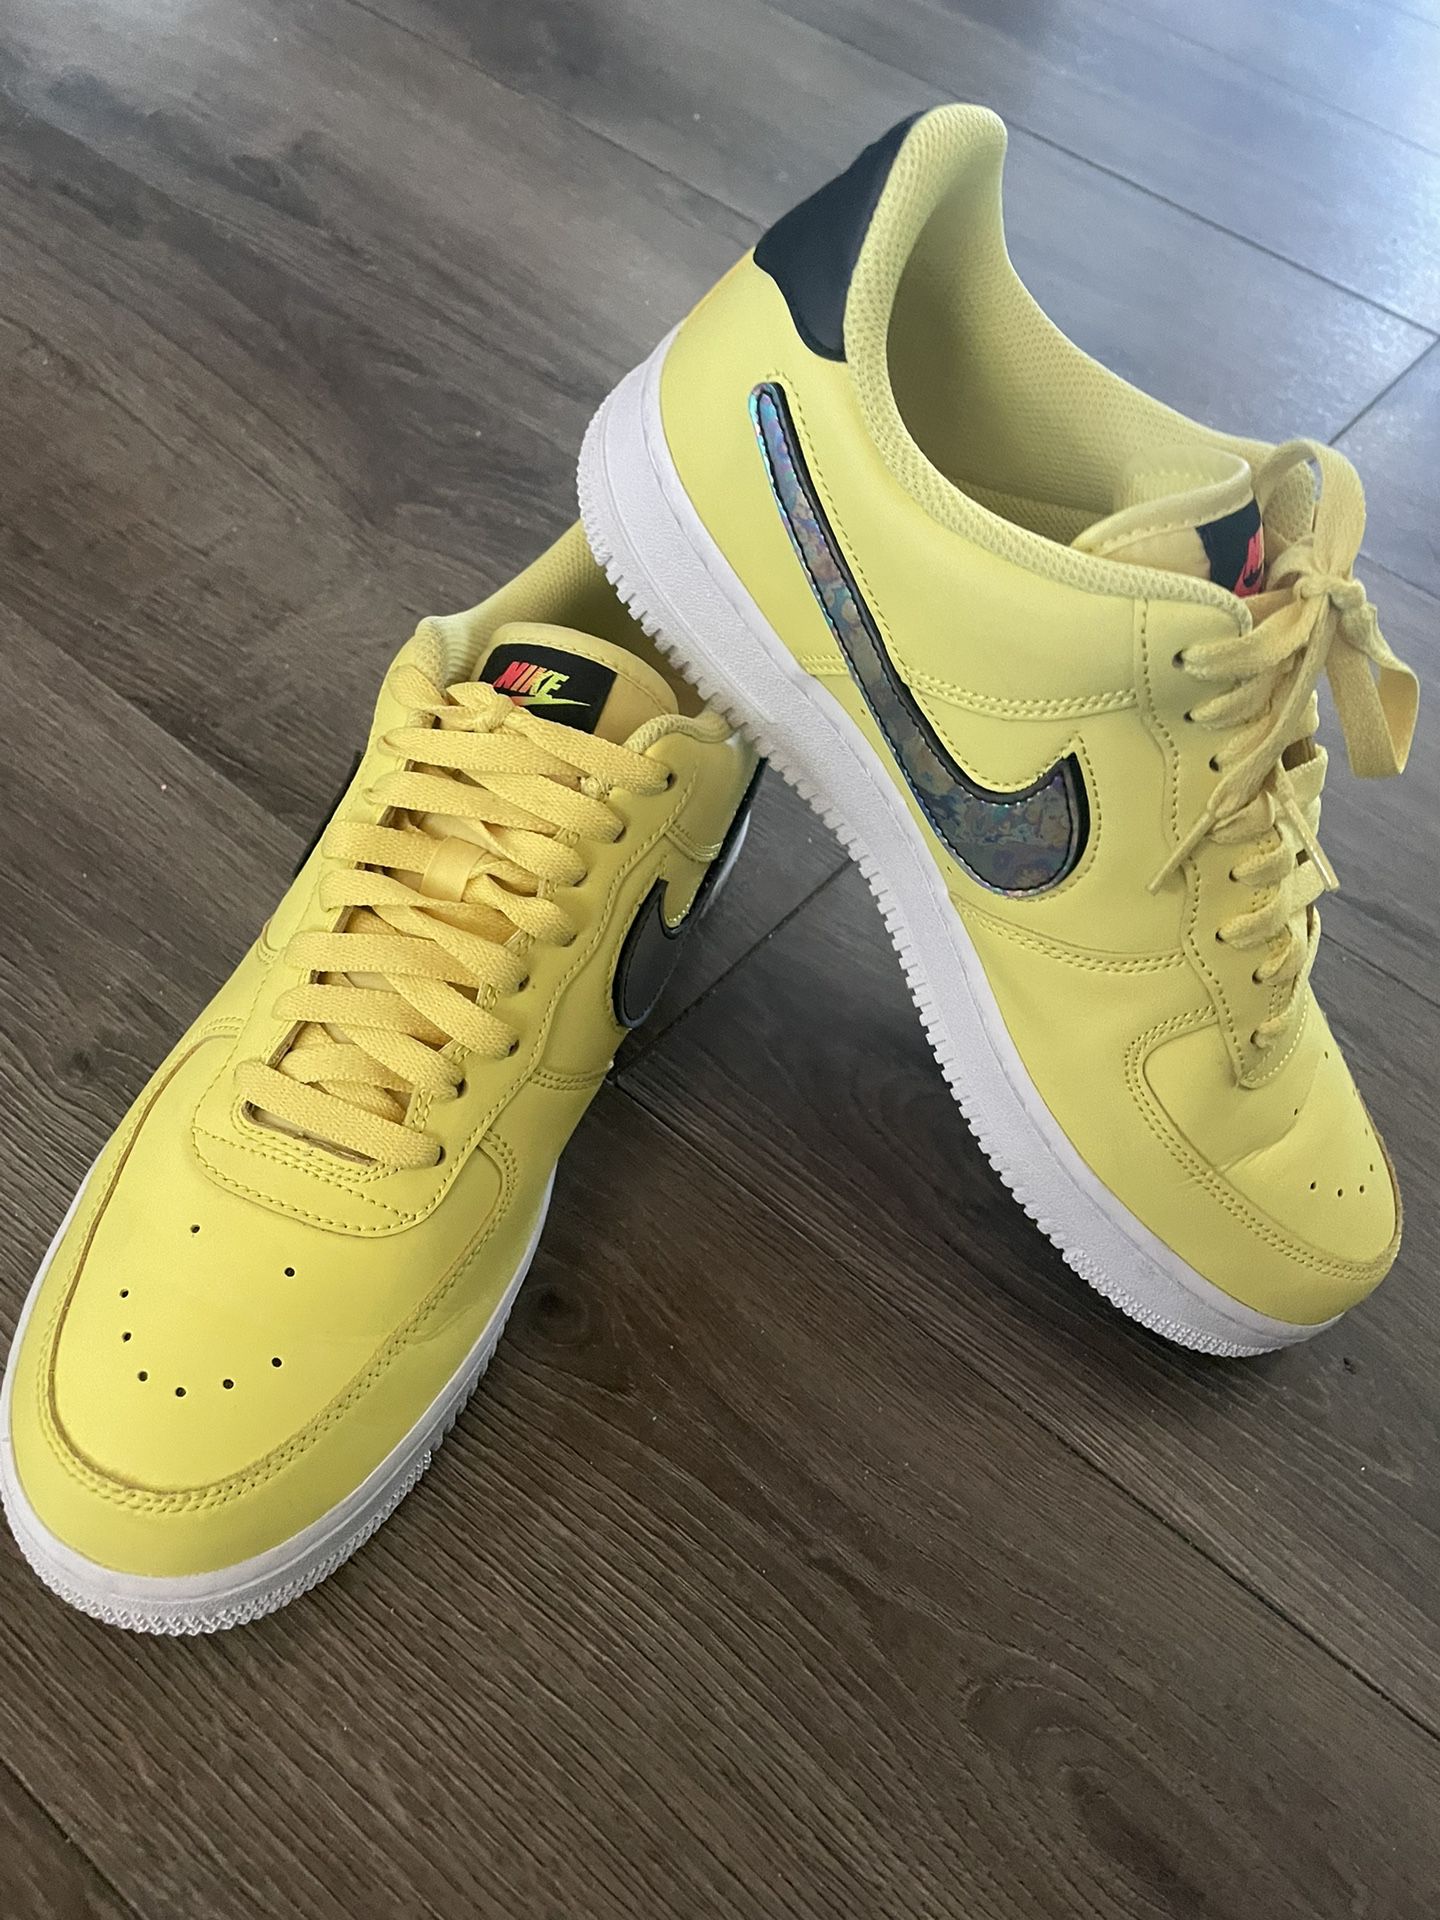 Air Force 1 /Soccer Fans! Sneakers